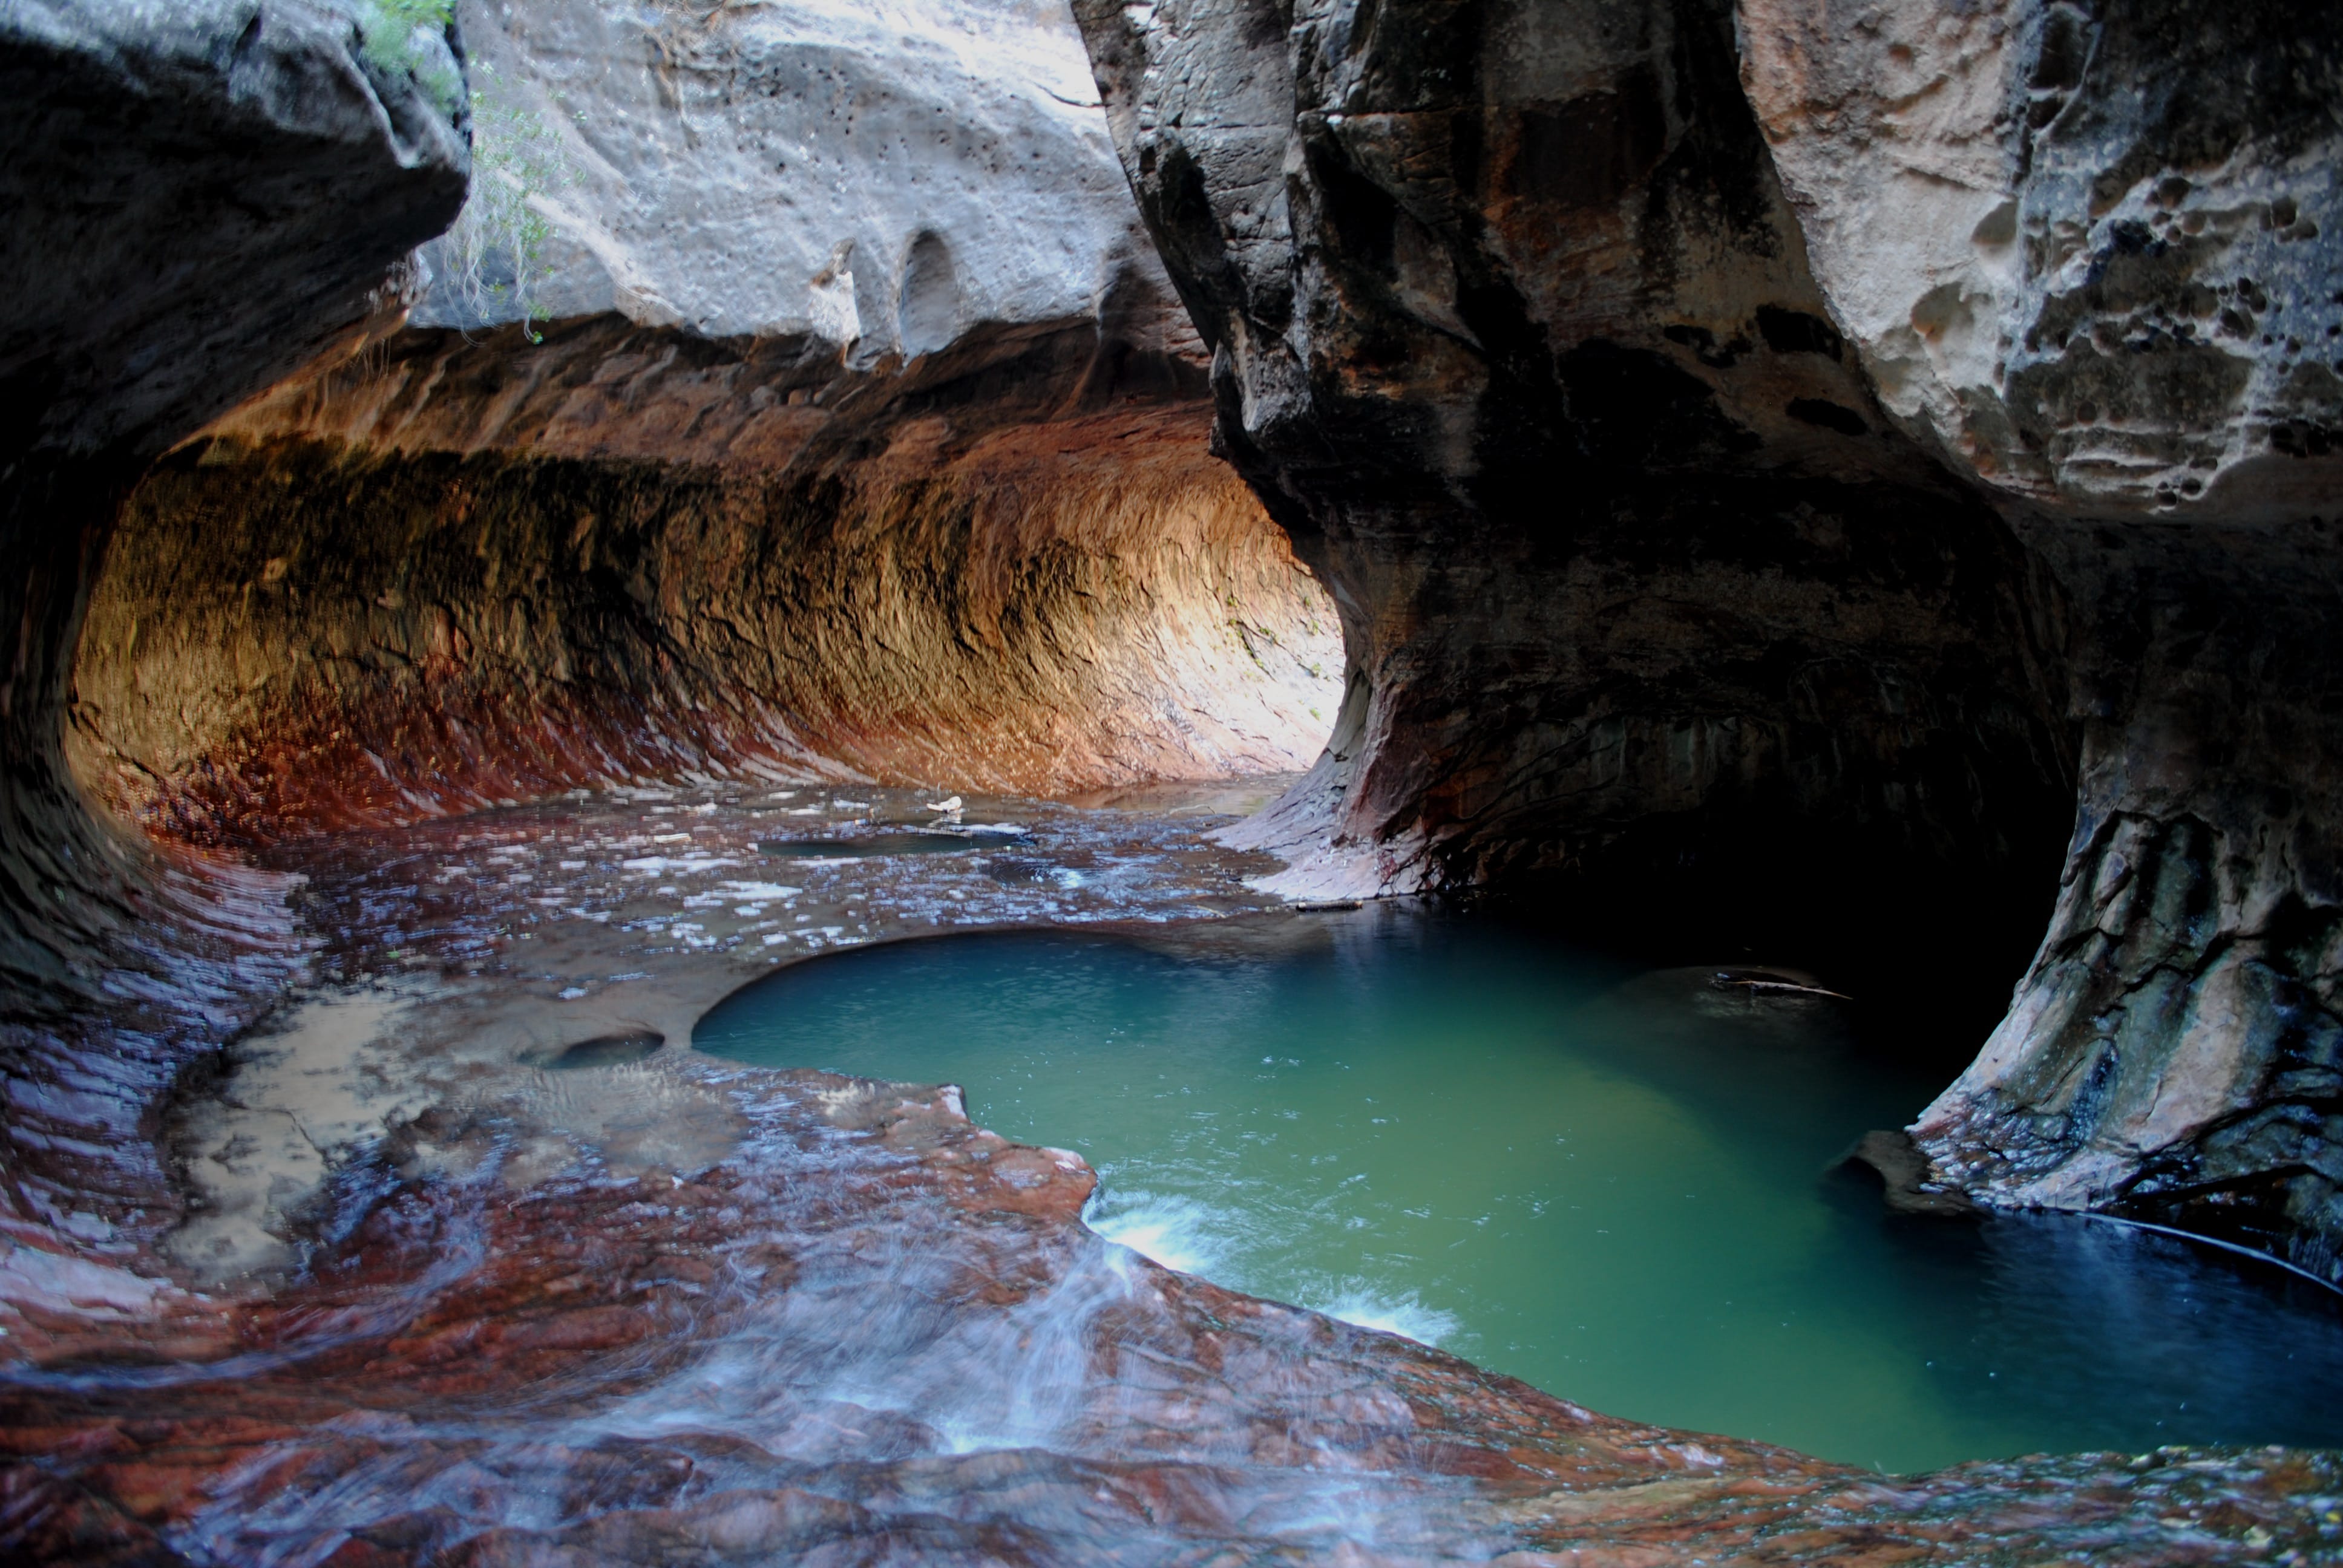 The Subway in Zion National Park is an outstanding area accessible by two routes of which we have done both. This adventure involved hiking down to the canyon floor, swimming through small pools and rappelling short sections of rock to reach nature's bathtubs.